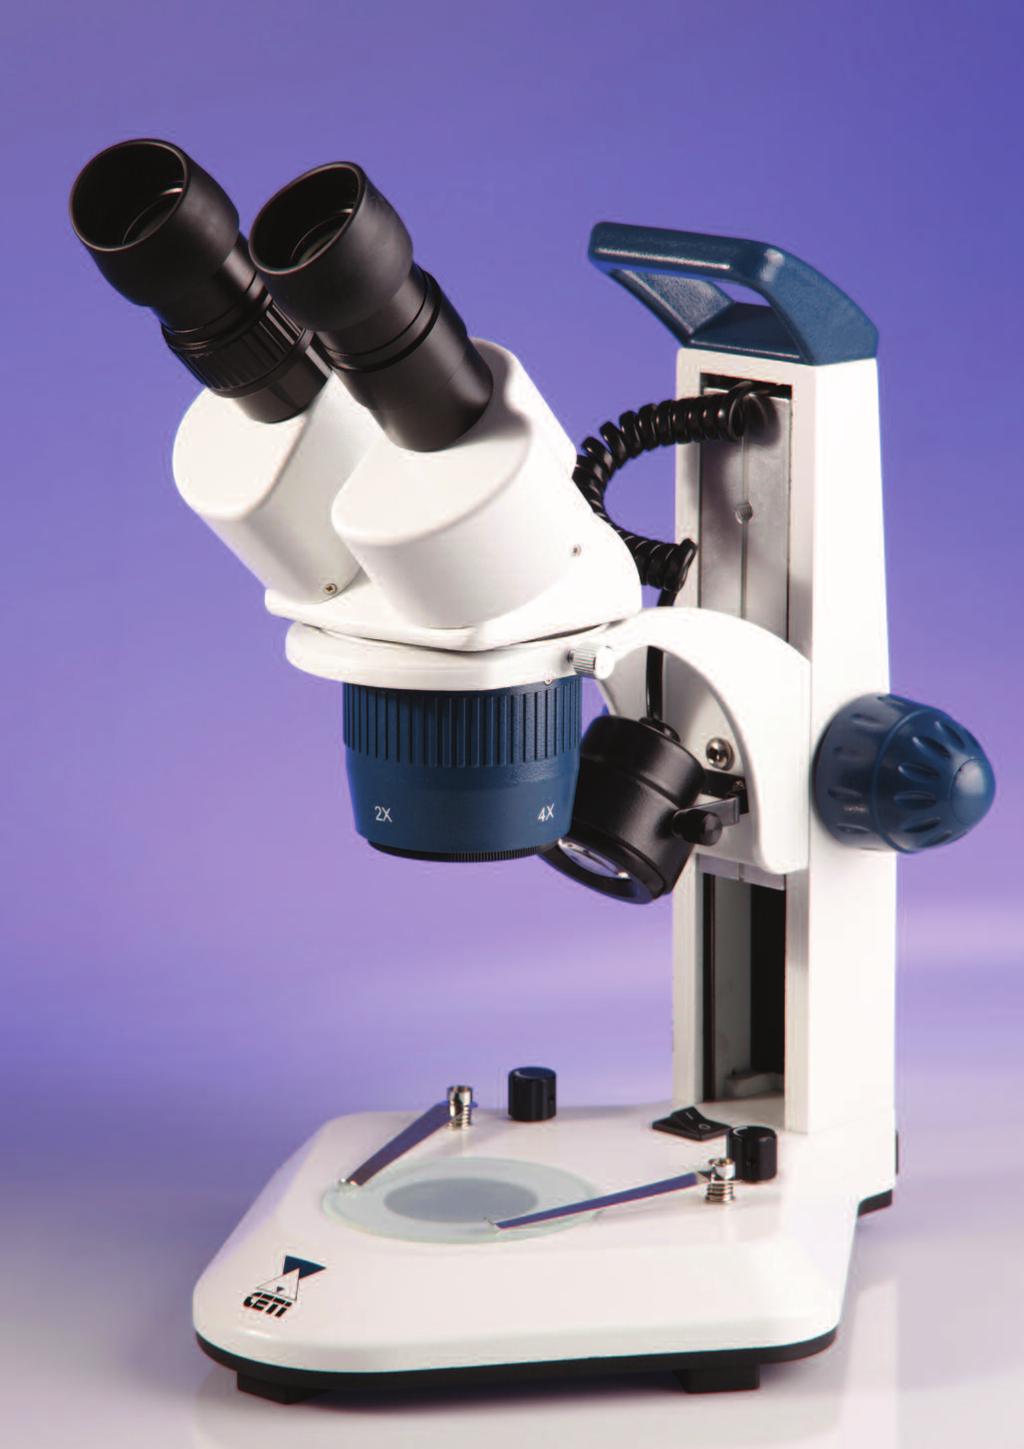 Star - 24 LED The Star is a Stereo Microscope which is designed for both educational and professional use.